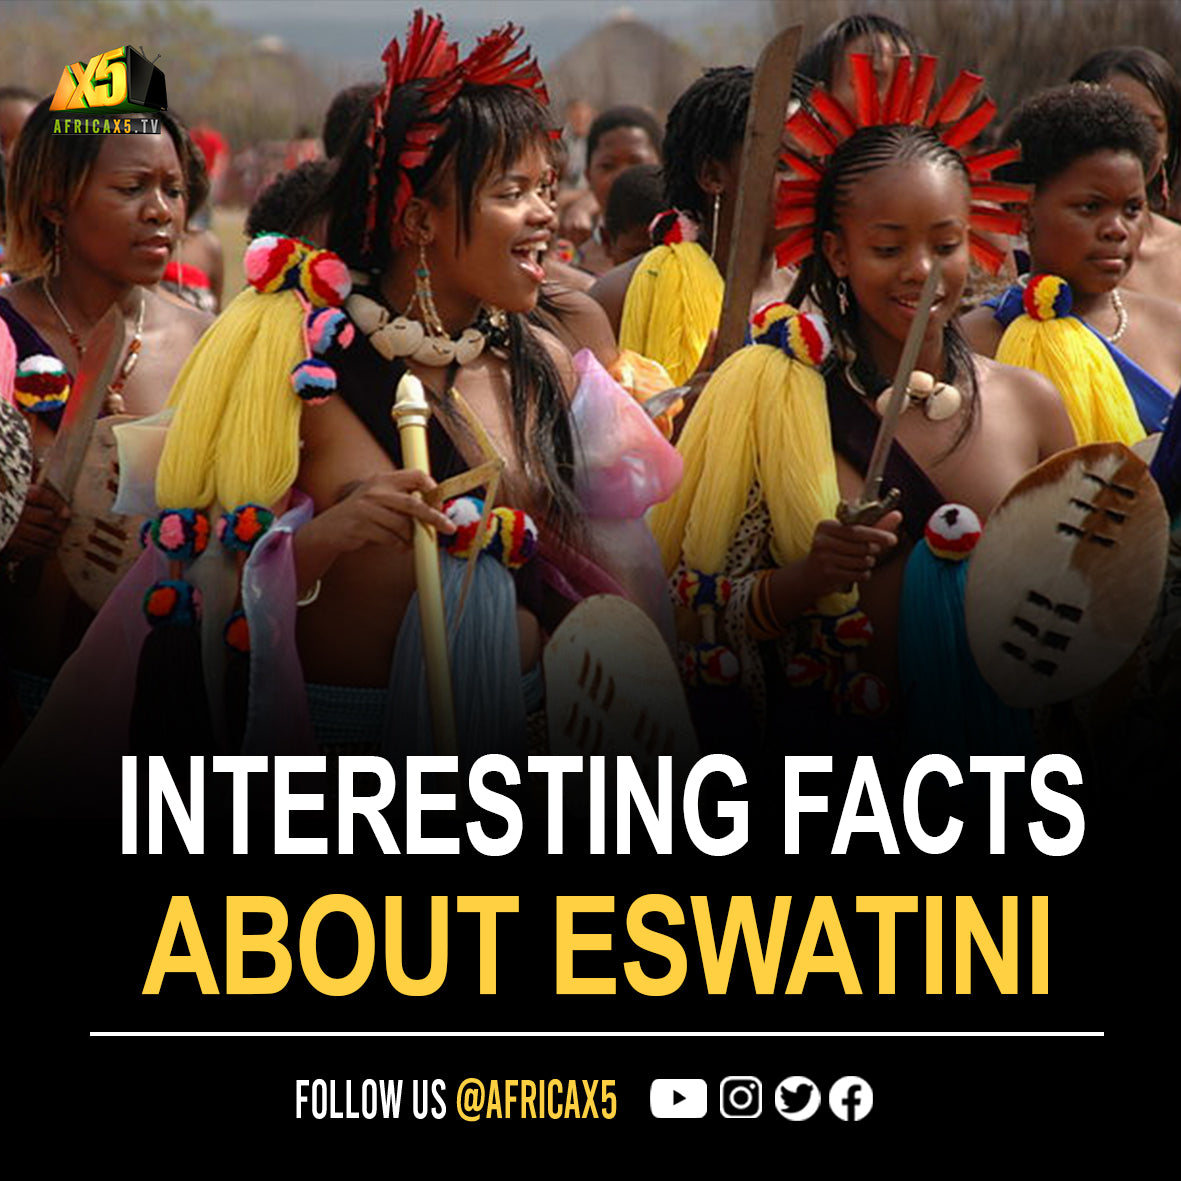 Interesting Facts About Eswatini